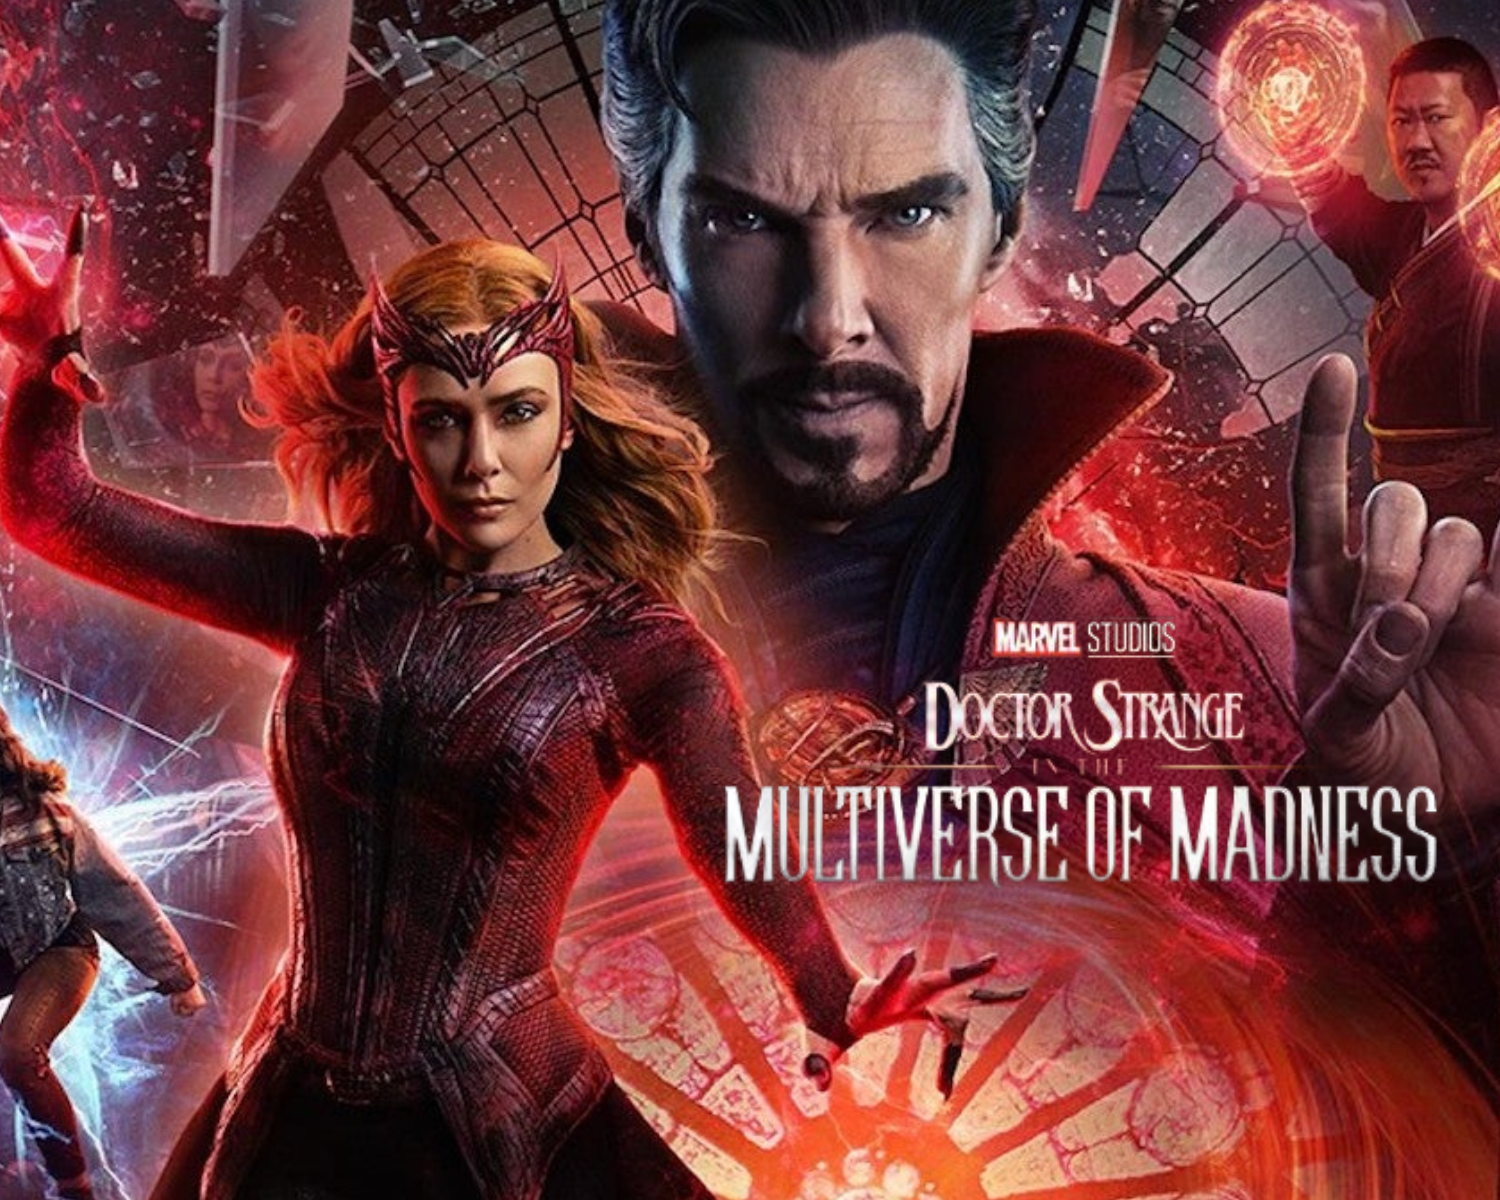 Benedict Cumberbatch and Elizabeth Olsen star in Dr. Strange in the Multiverse of Madness from Sam Raimi for Marvel Studios